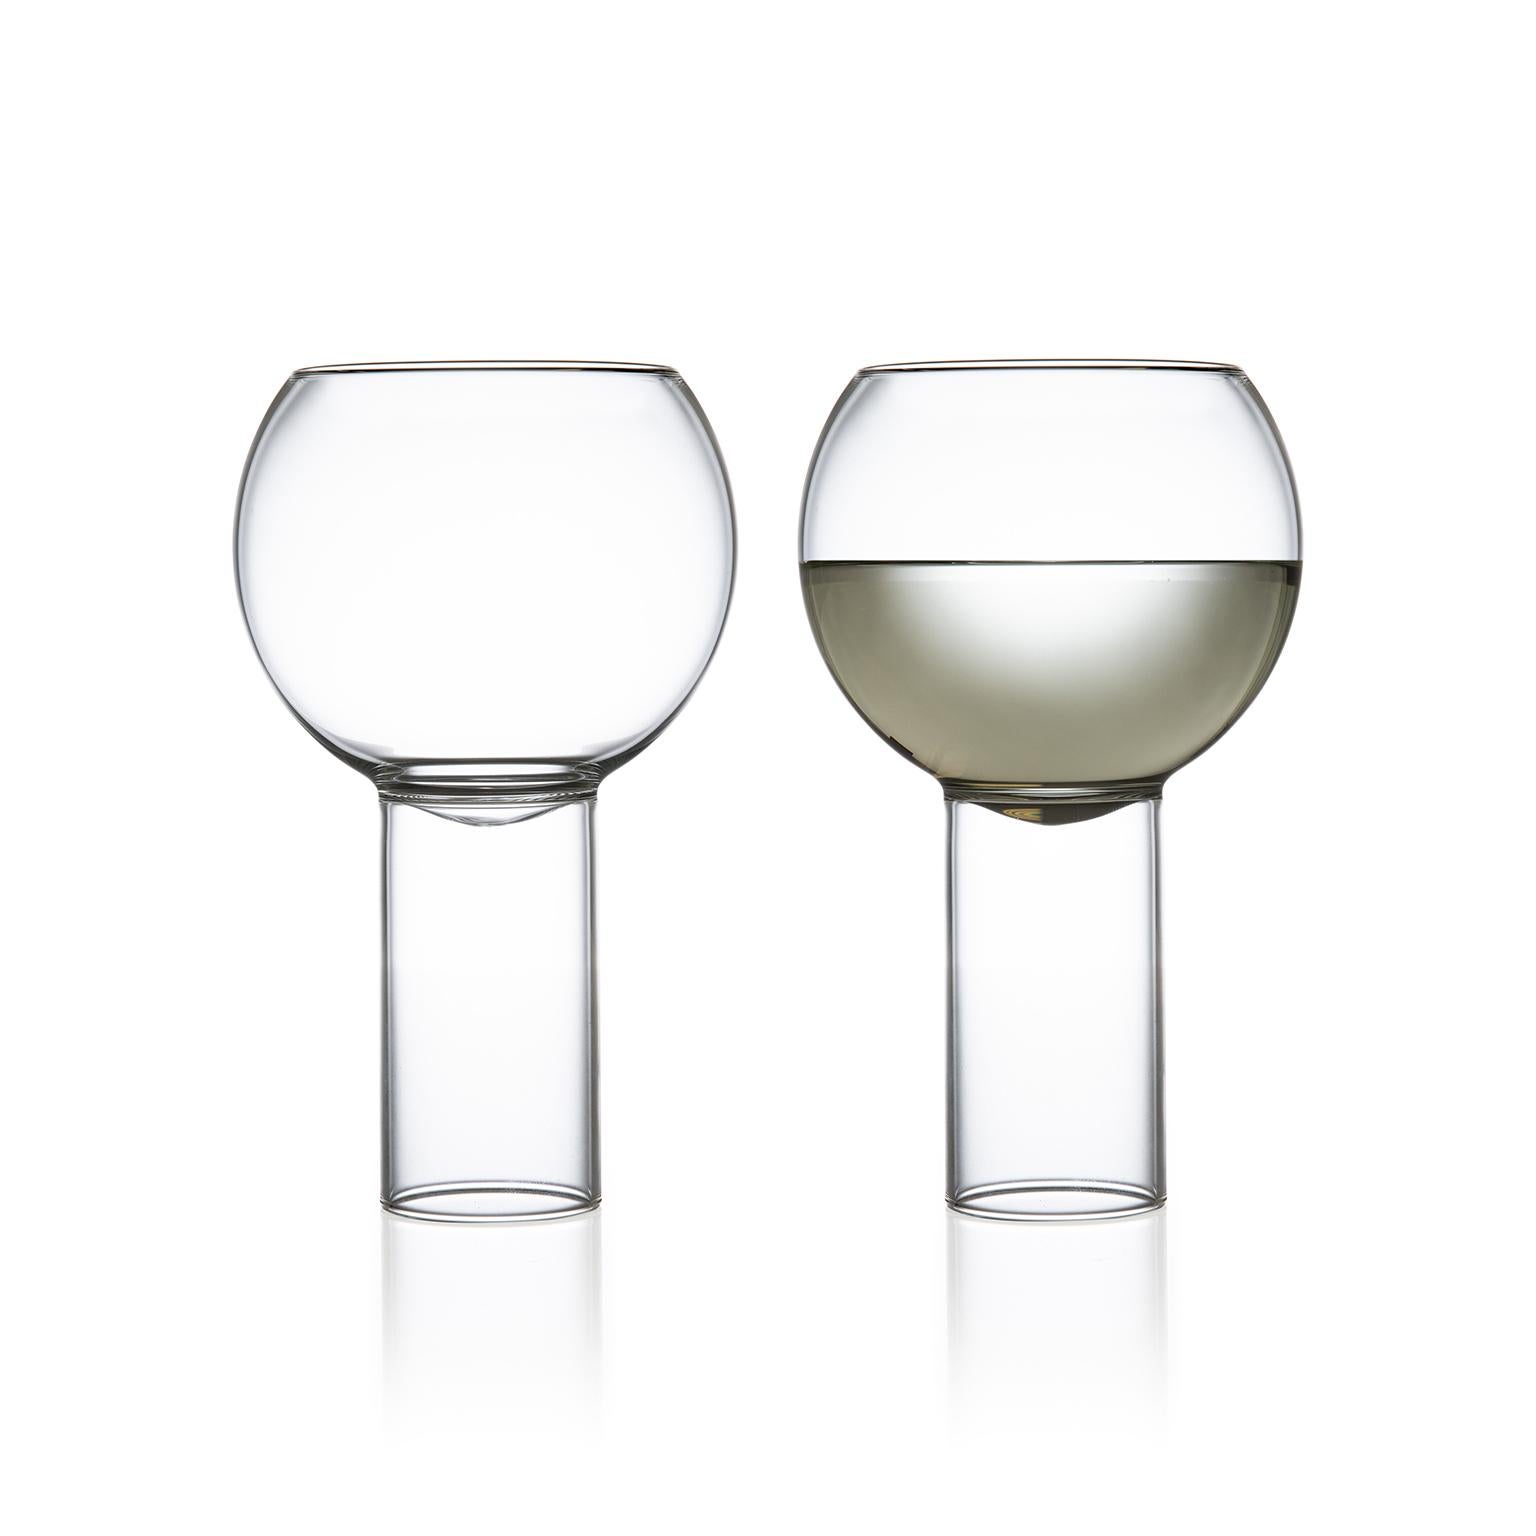 Tulip tall medium - set of two

This item is also available in the US.

The Tulip collection was inspired by the small bistro wine glasses found in European bars and cafes. The bowl of the glass sits down into the cylindrical stem, highlighting